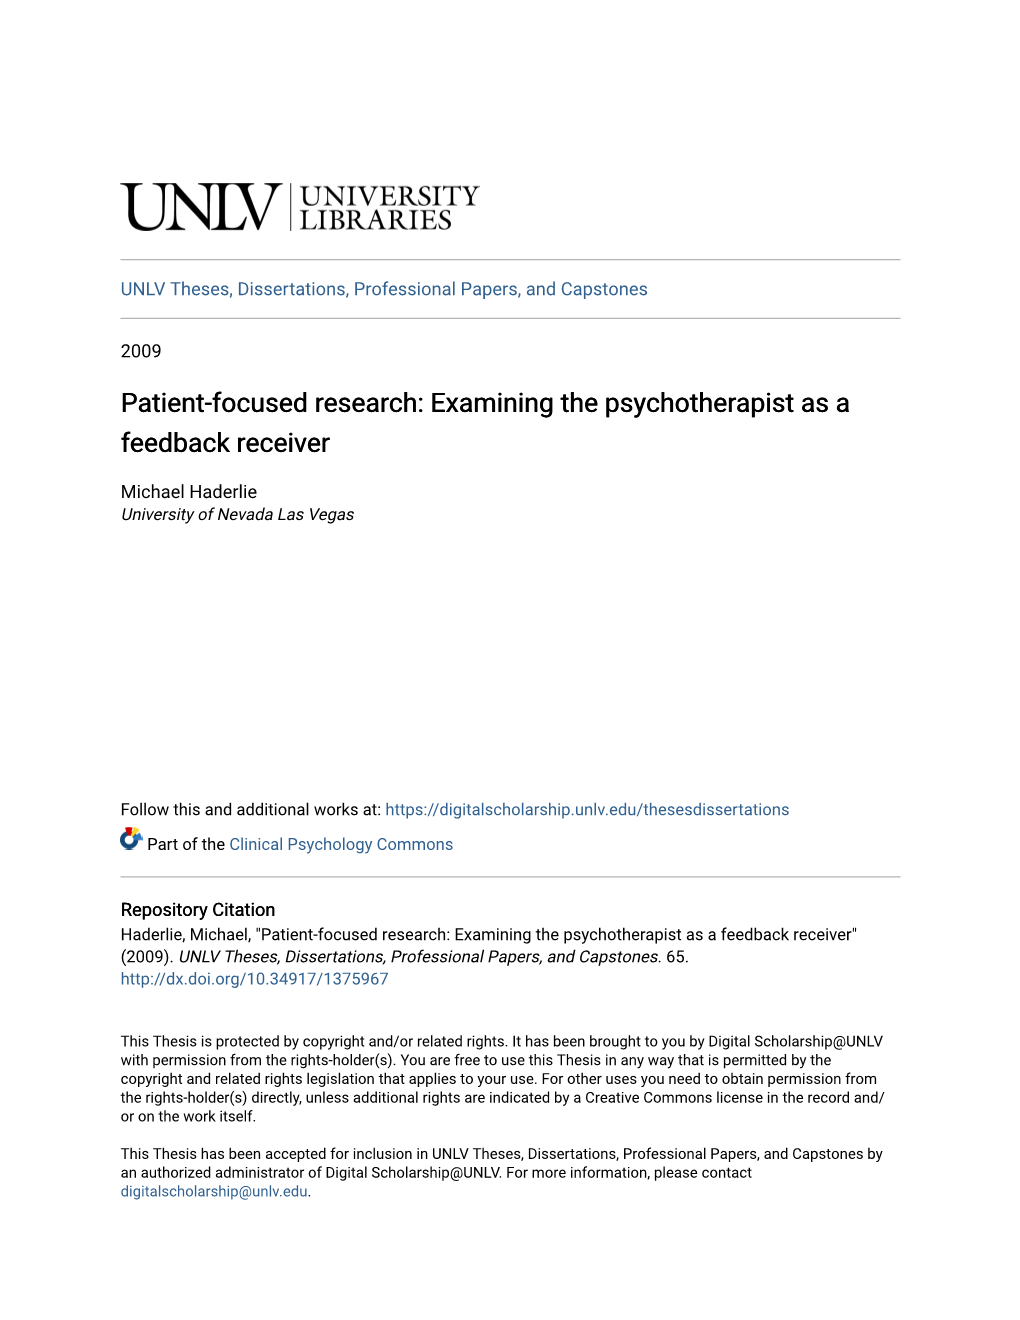 Patient-Focused Research: Examining the Psychotherapist As a Feedback Receiver